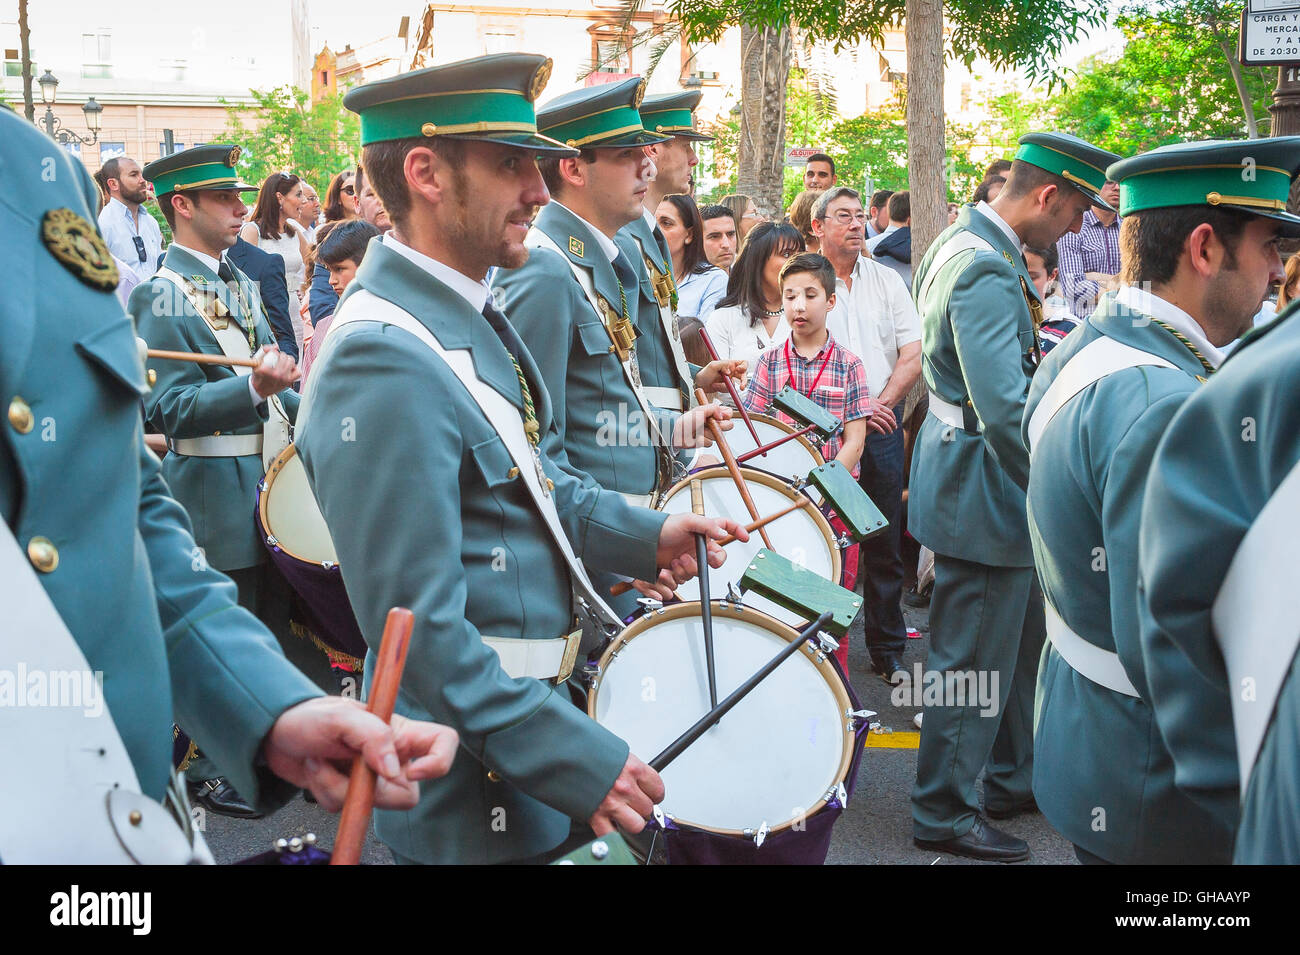 Marching band Europe, a marching band plays ahead of a religious procession during Easter Holy Week in Seville, Spain. Stock Photo